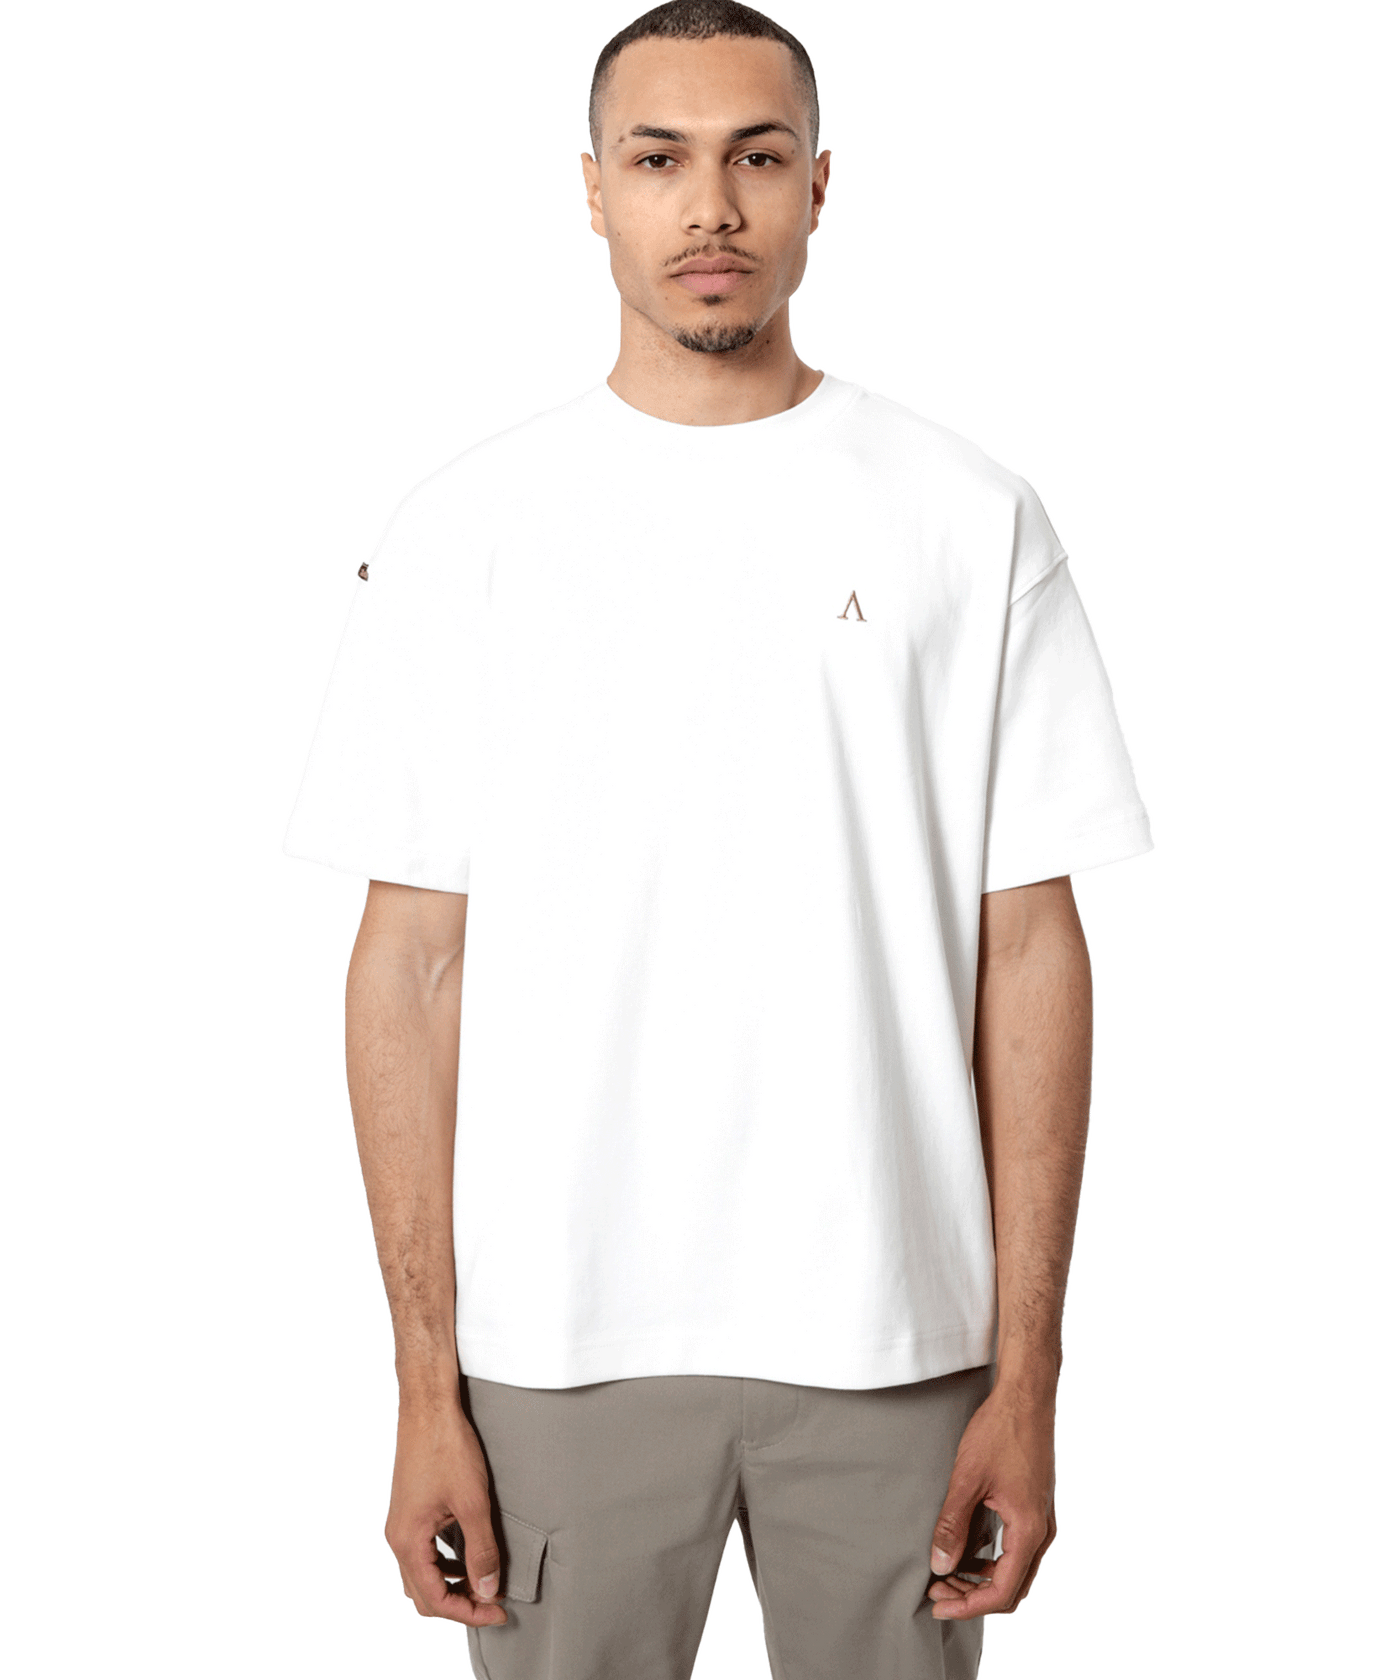 AEDEN - A22242785 - Charles - 101 Offwhite